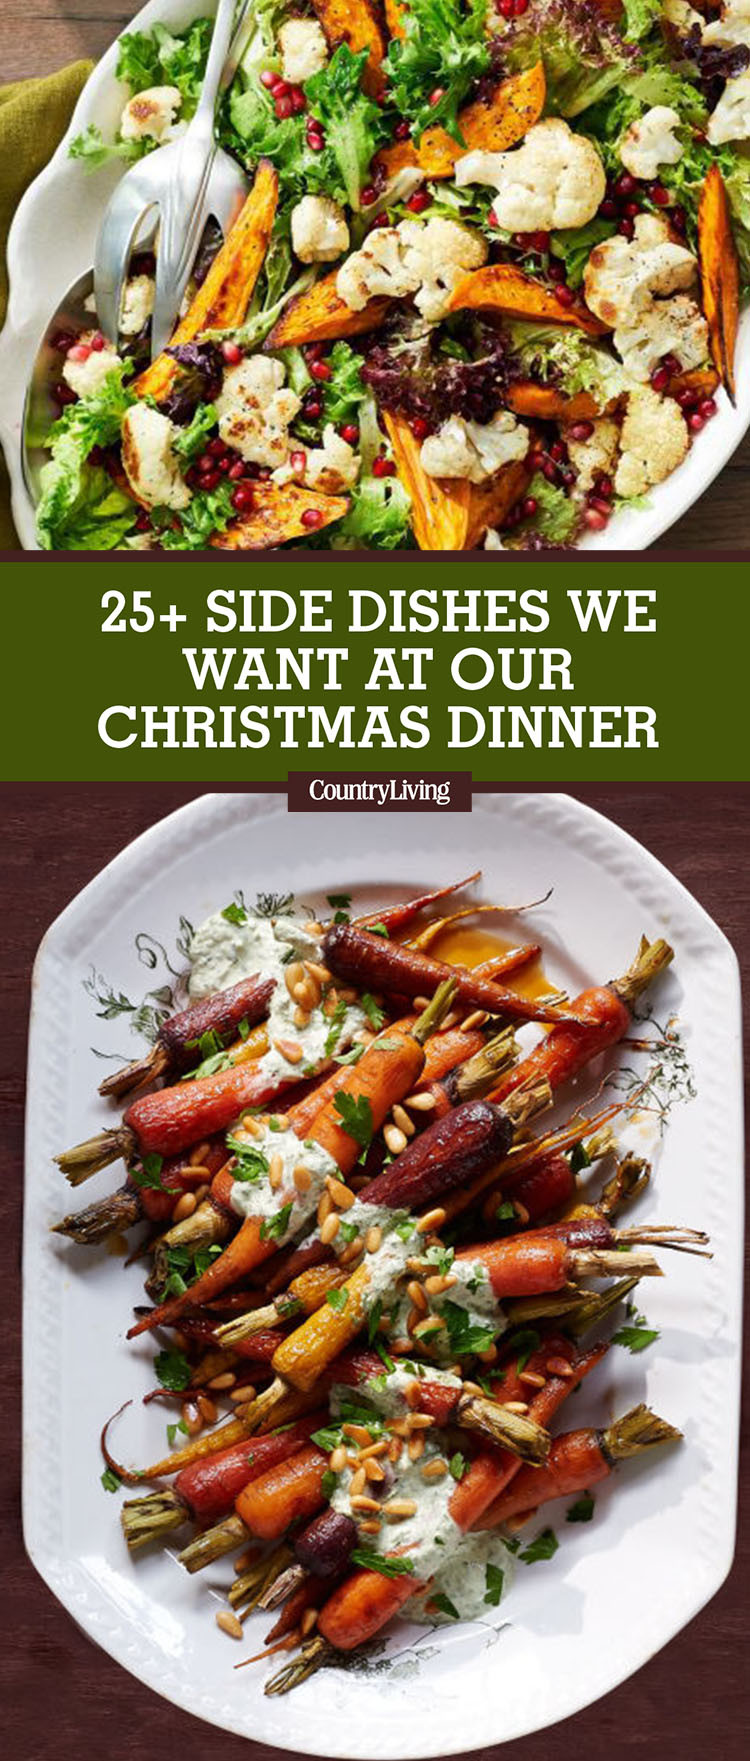 Easy Side Dishes For Christmas
 30 Easy Christmas Side Dishes Best Recipes for Holiday